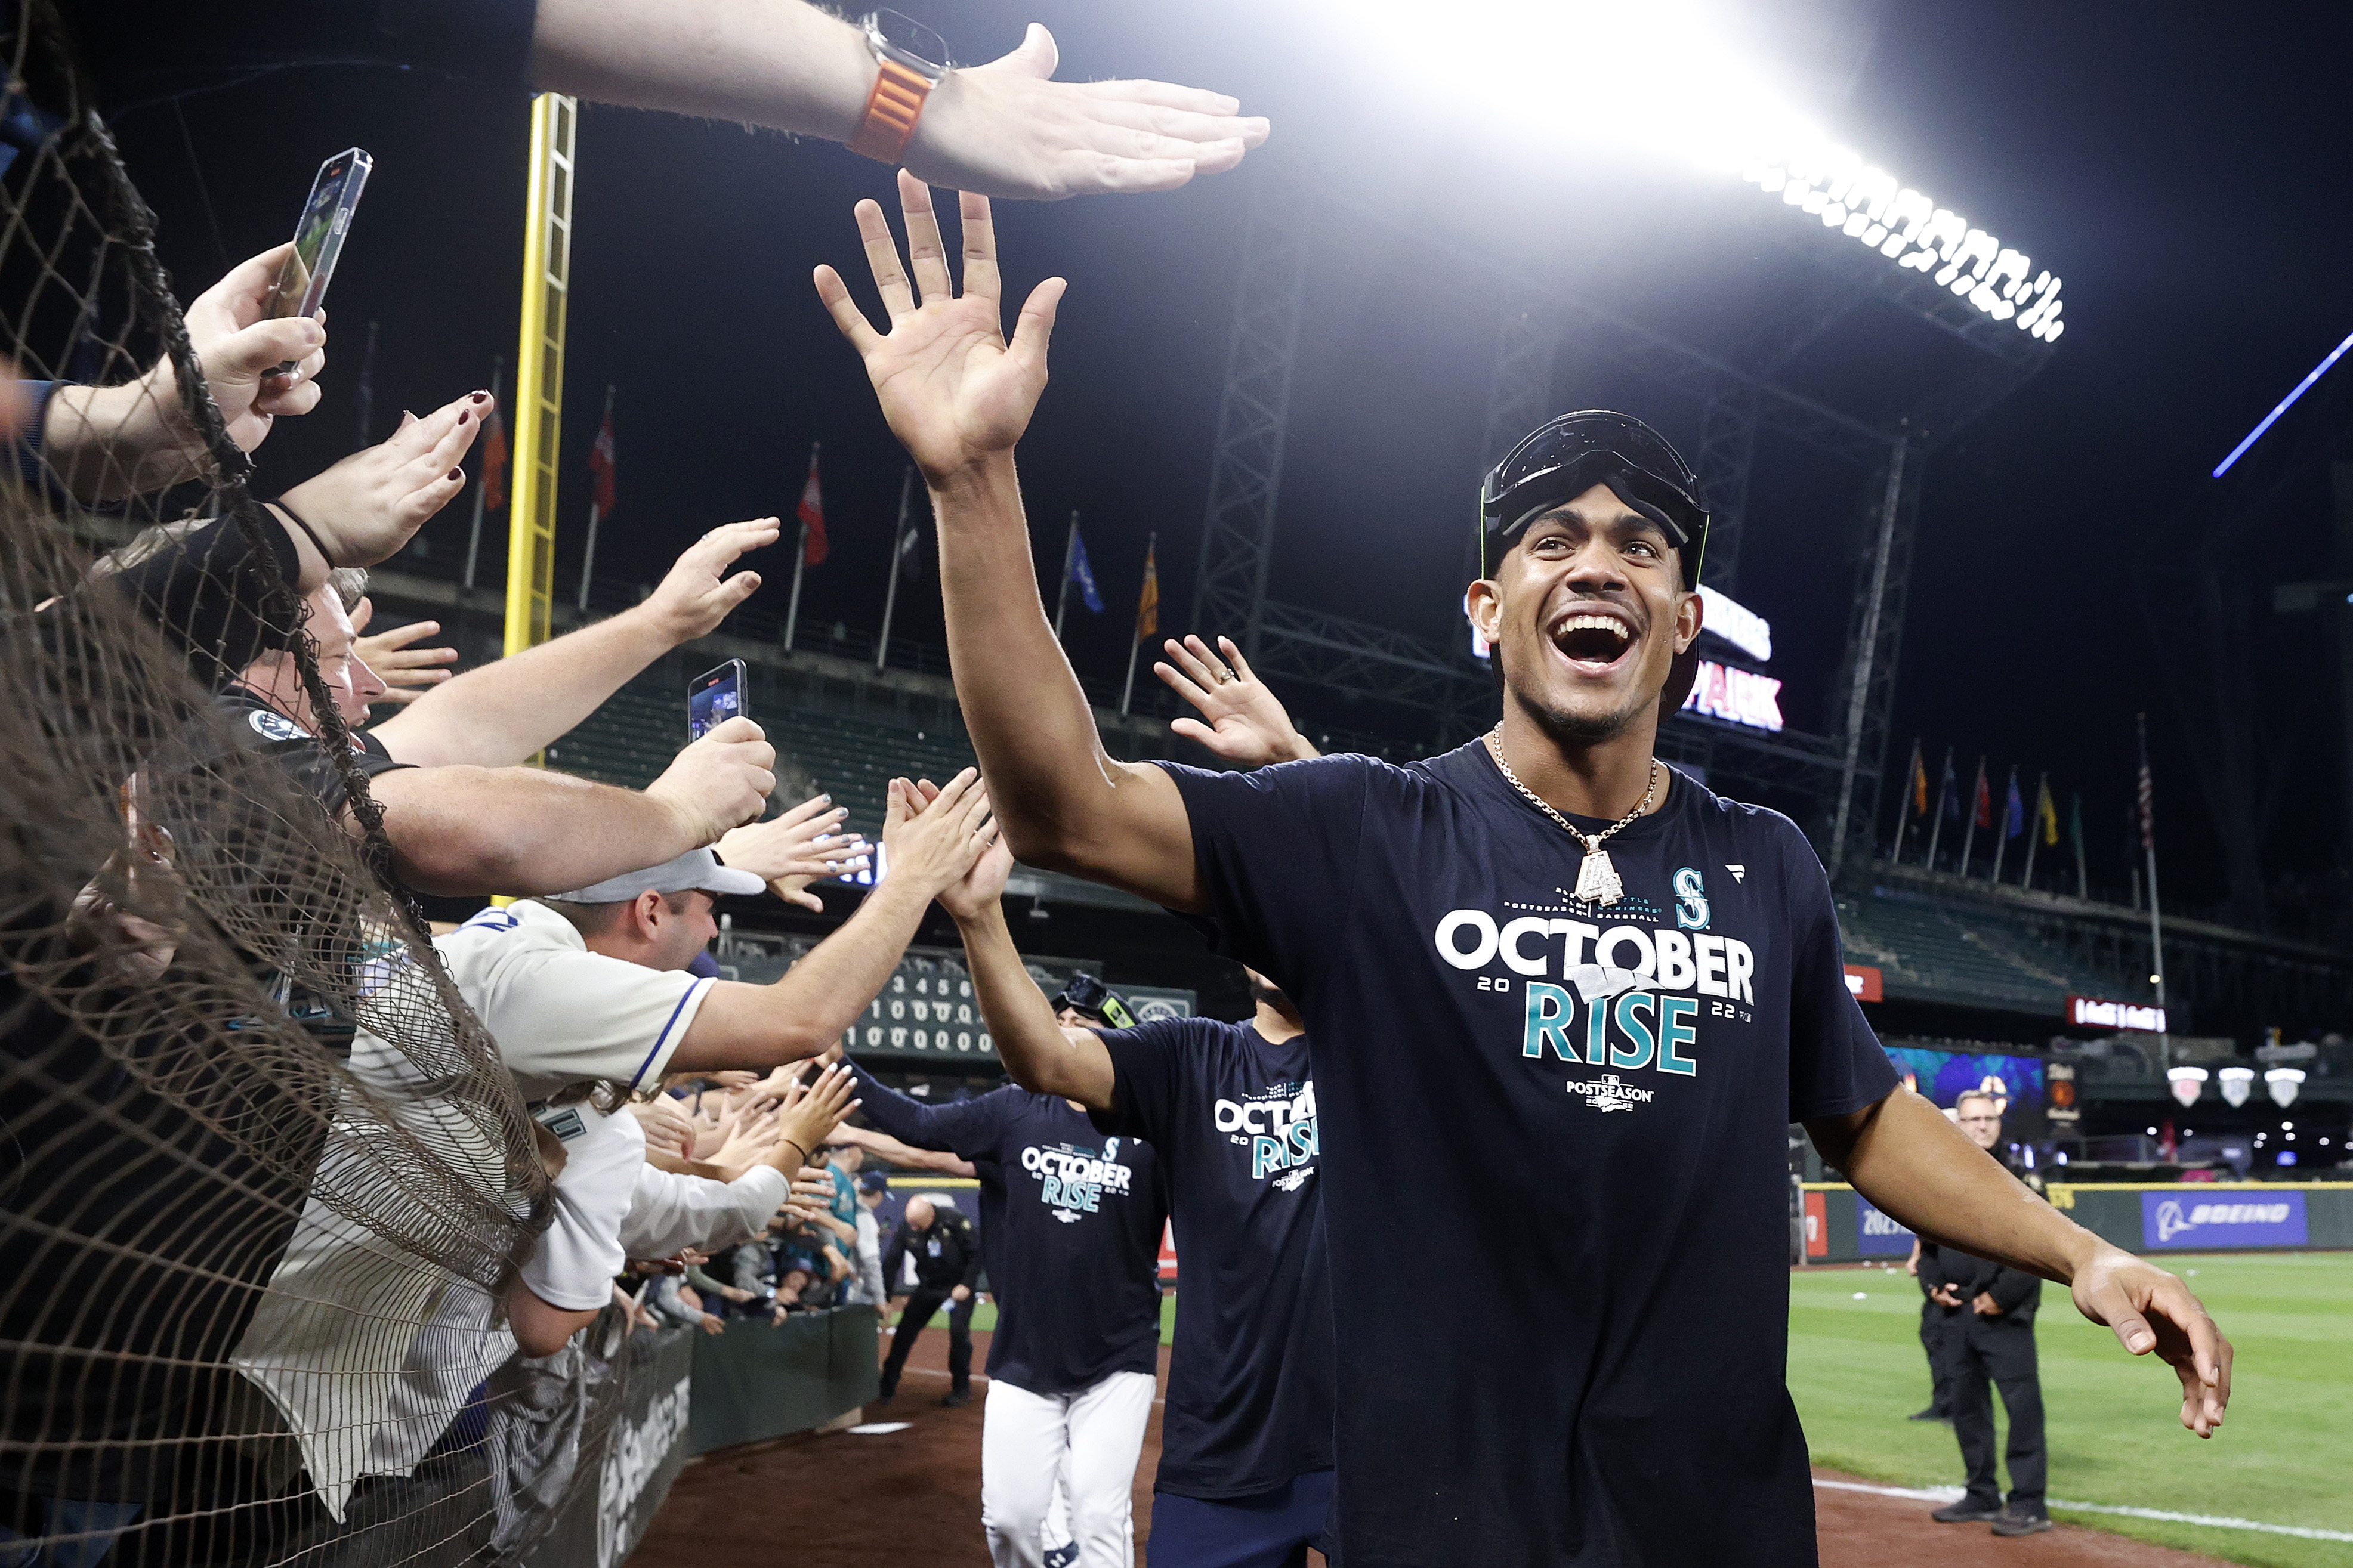 The Seattle Mariners Are Built for Postseason Success